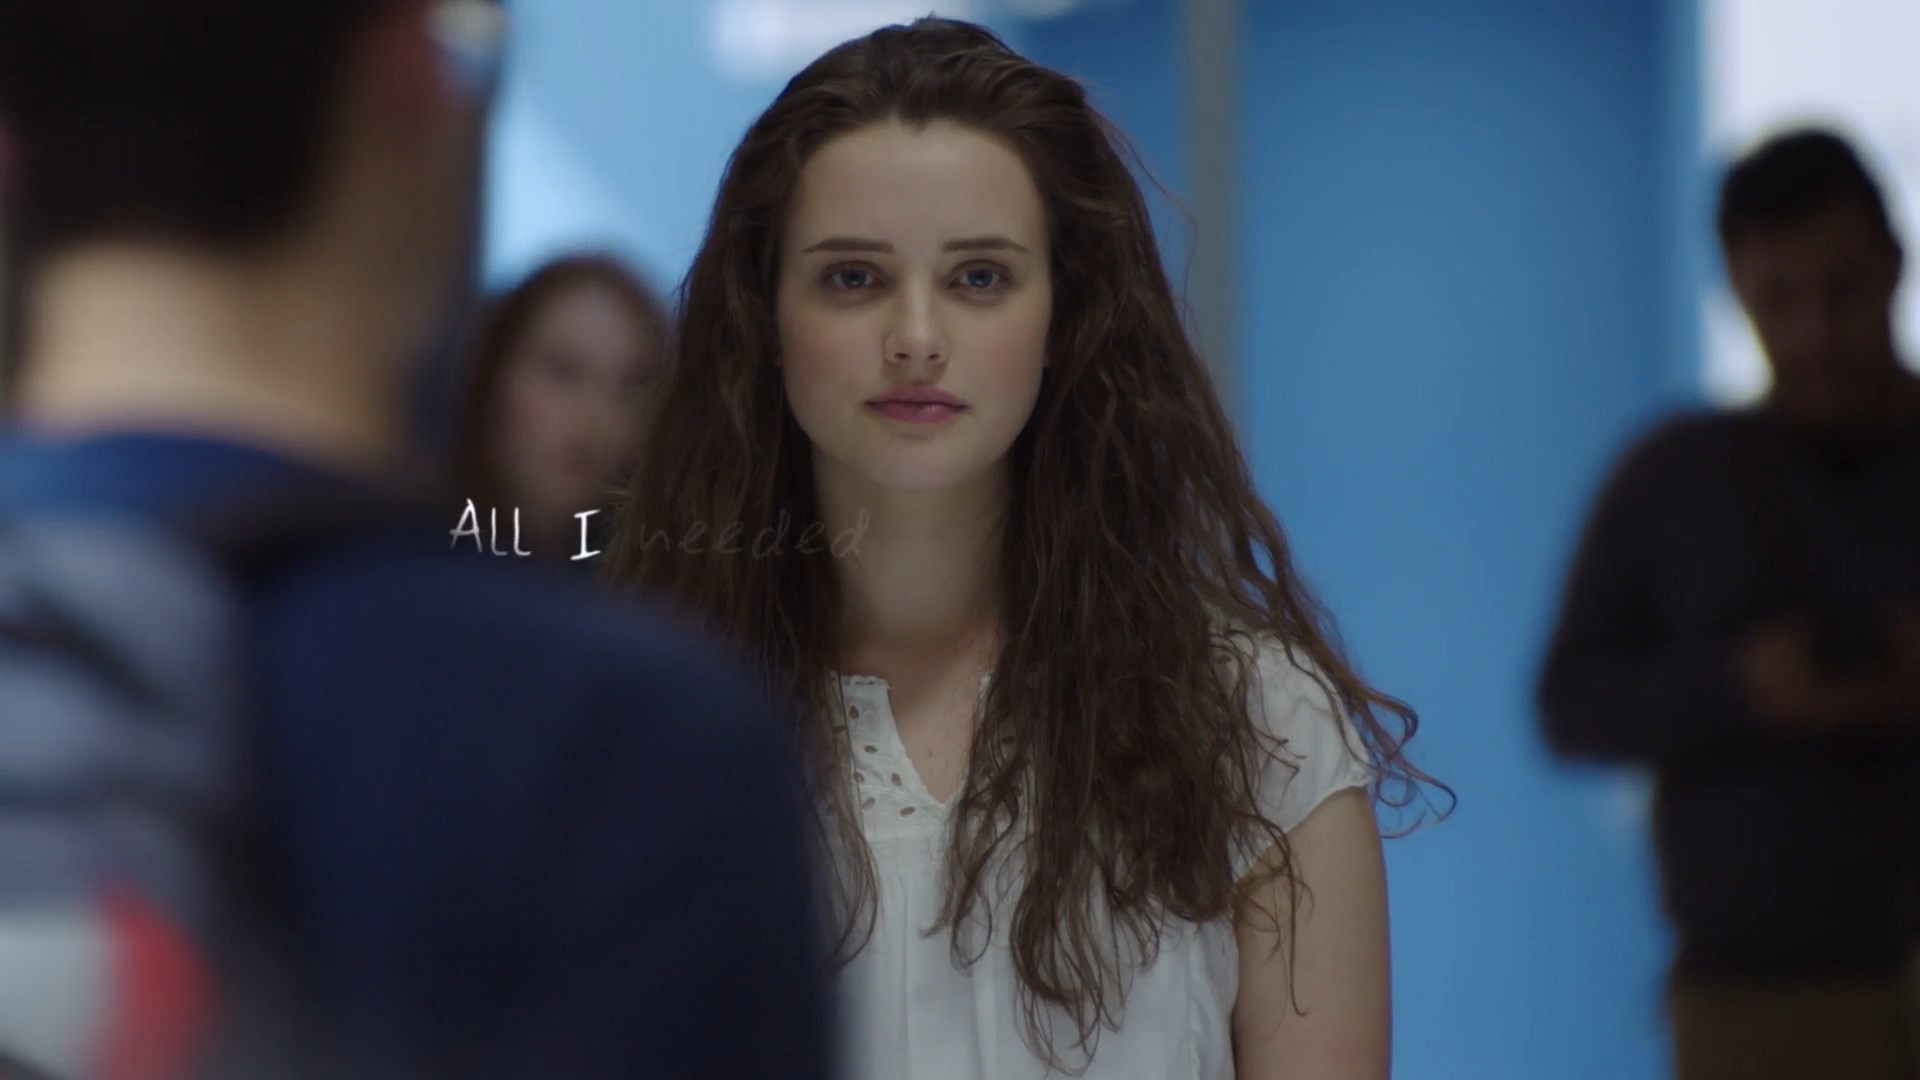 1920x1080 Here's a cool lyric video with scenes from 13RW season one.